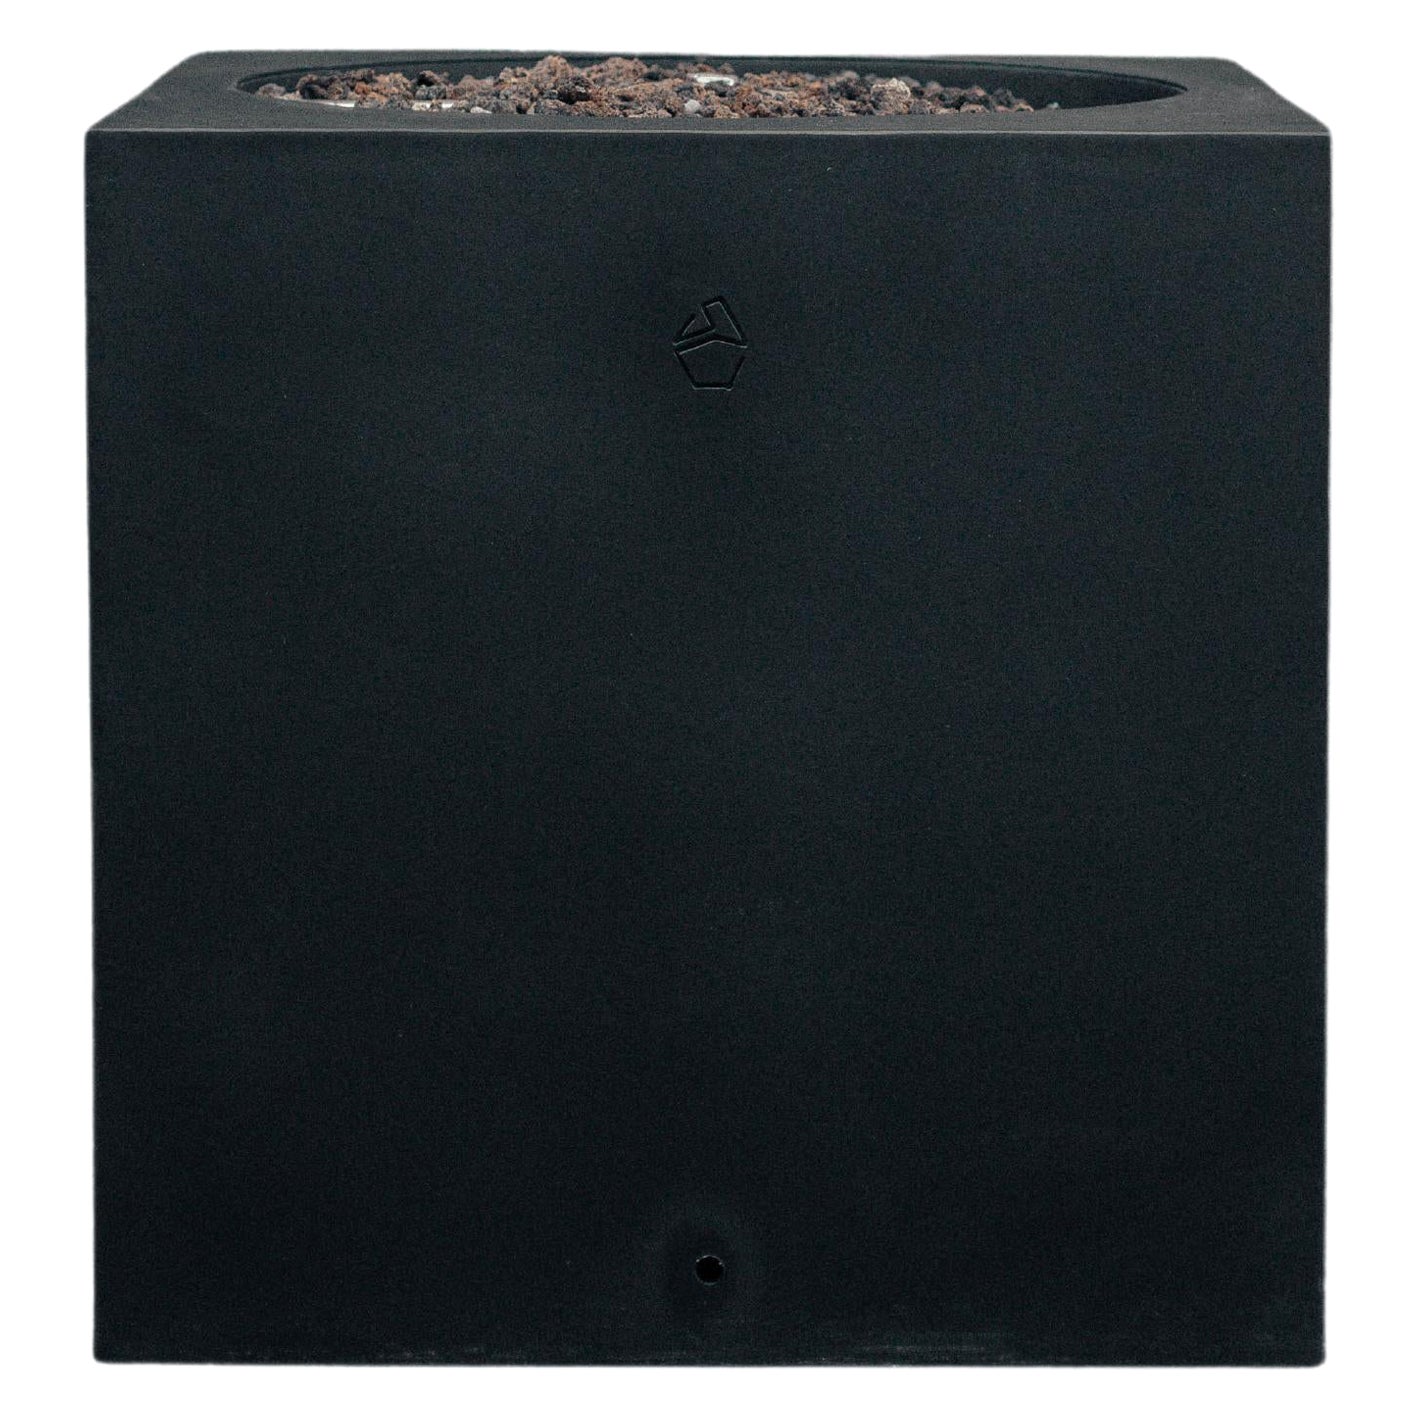 Dark Black Cubus Firepit by Andres Monnier For Sale